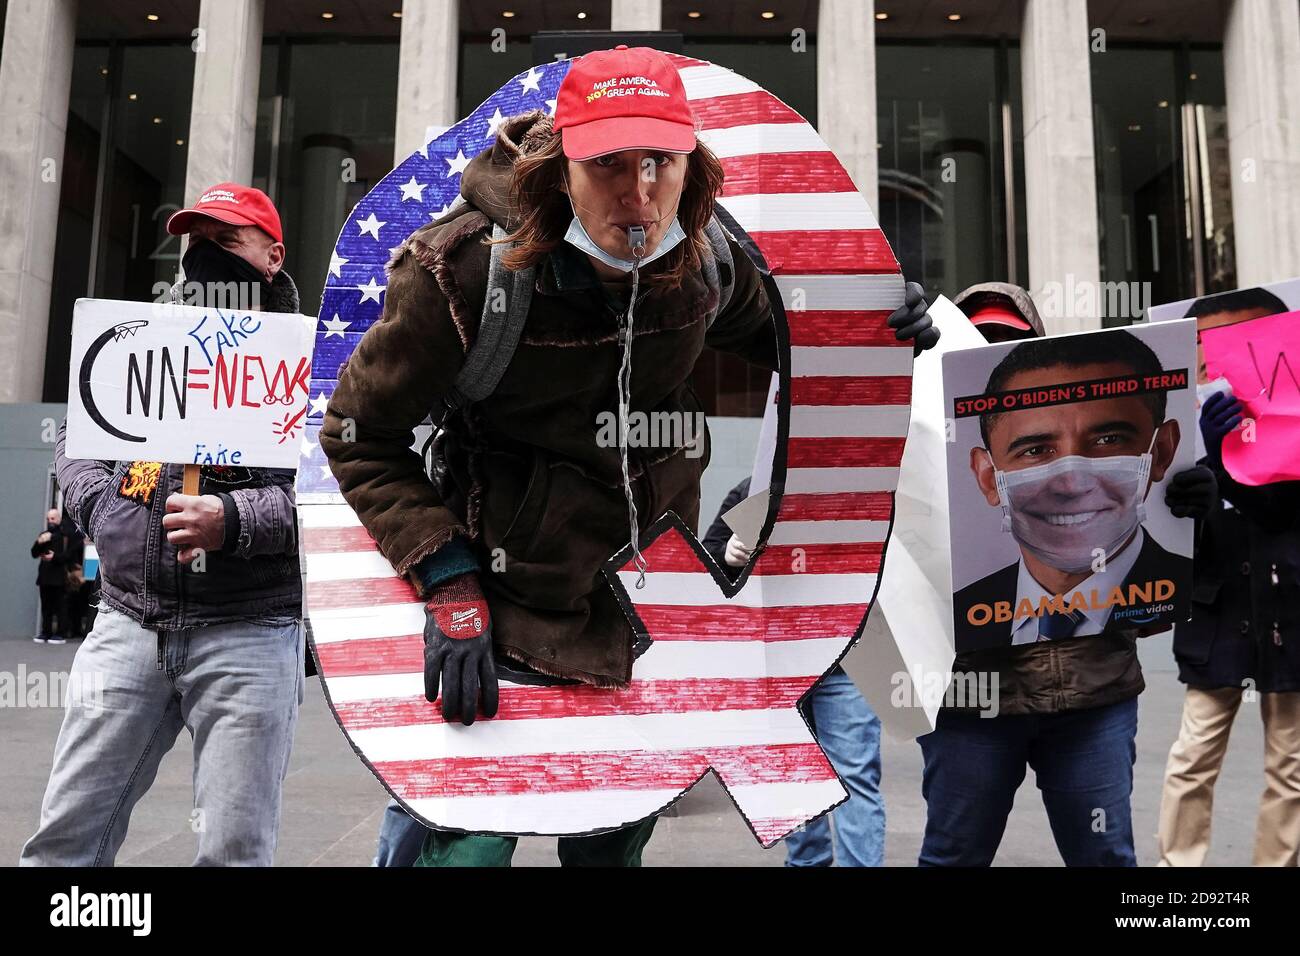 Qanon activists rally to show their support for Fox News outside their headquarters in the Manhattan borough of New York City, New York, U.S., November 2, 2020. REUTERS/Carlo Allegri Stock Photo